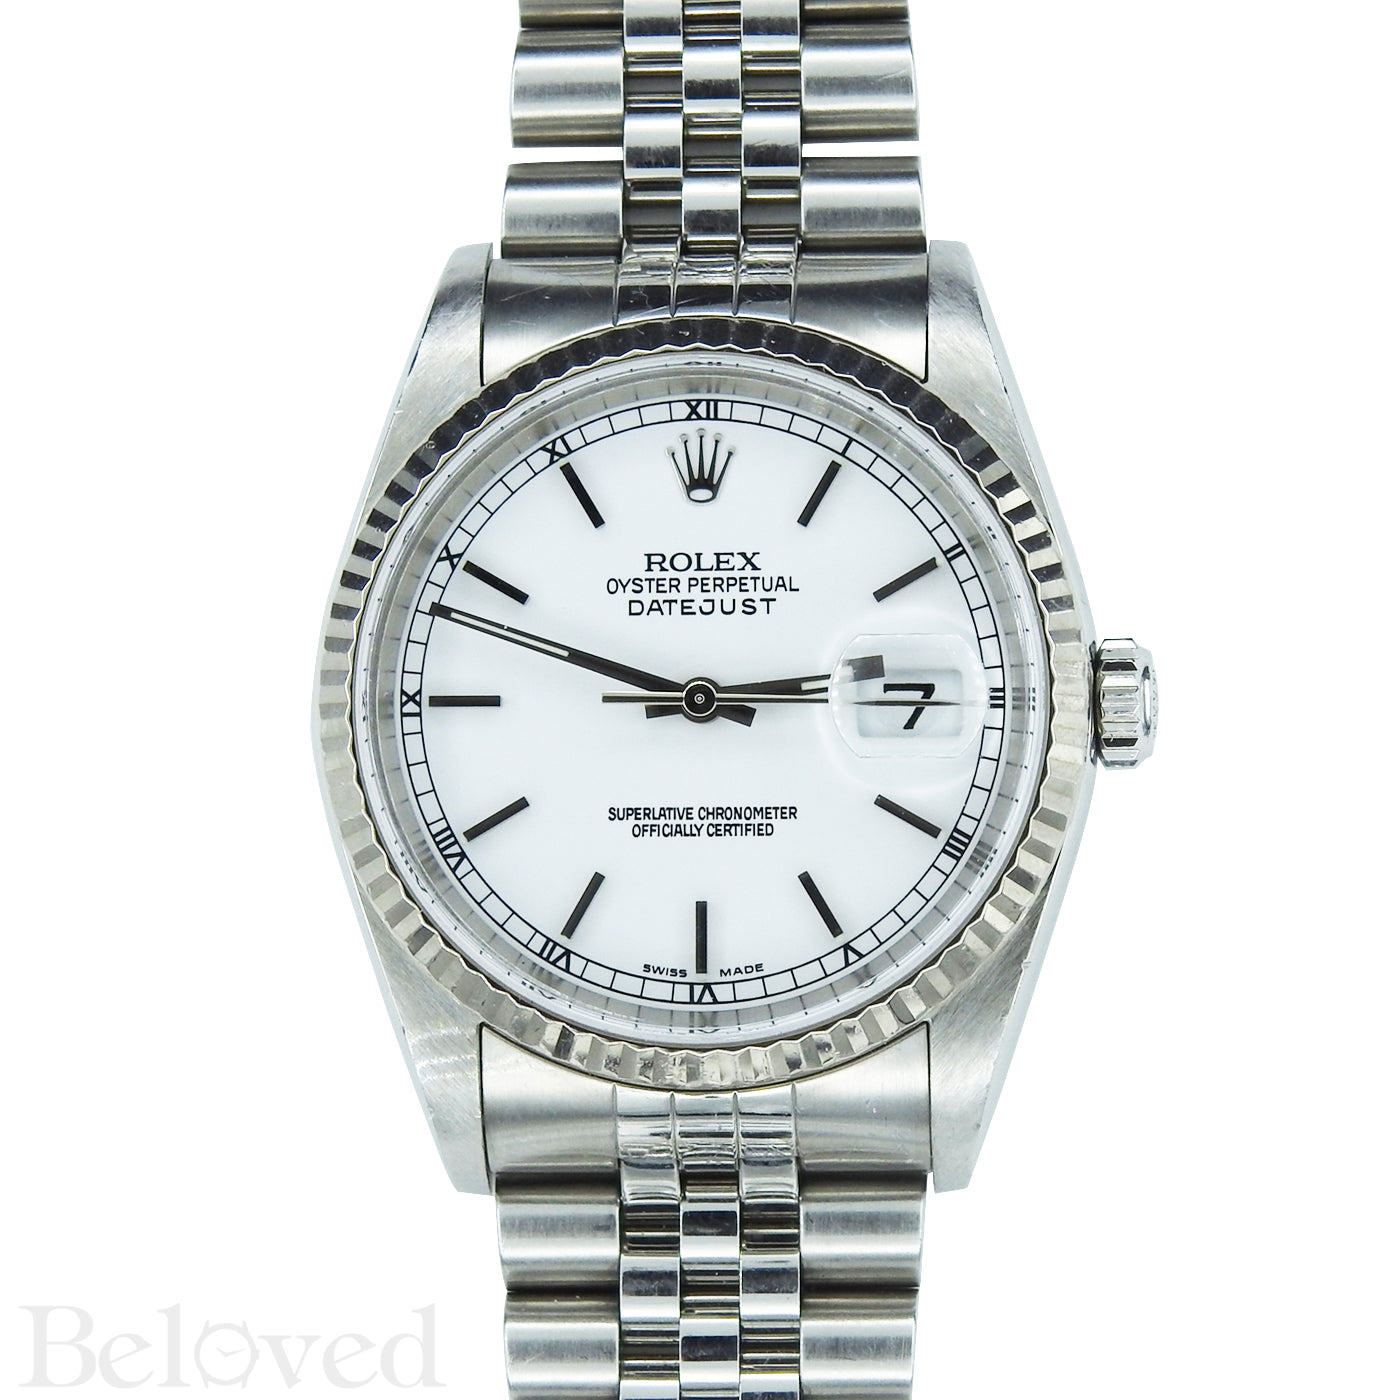 Rolex Datejust 16234 White Dial with Box and Papers Image 1